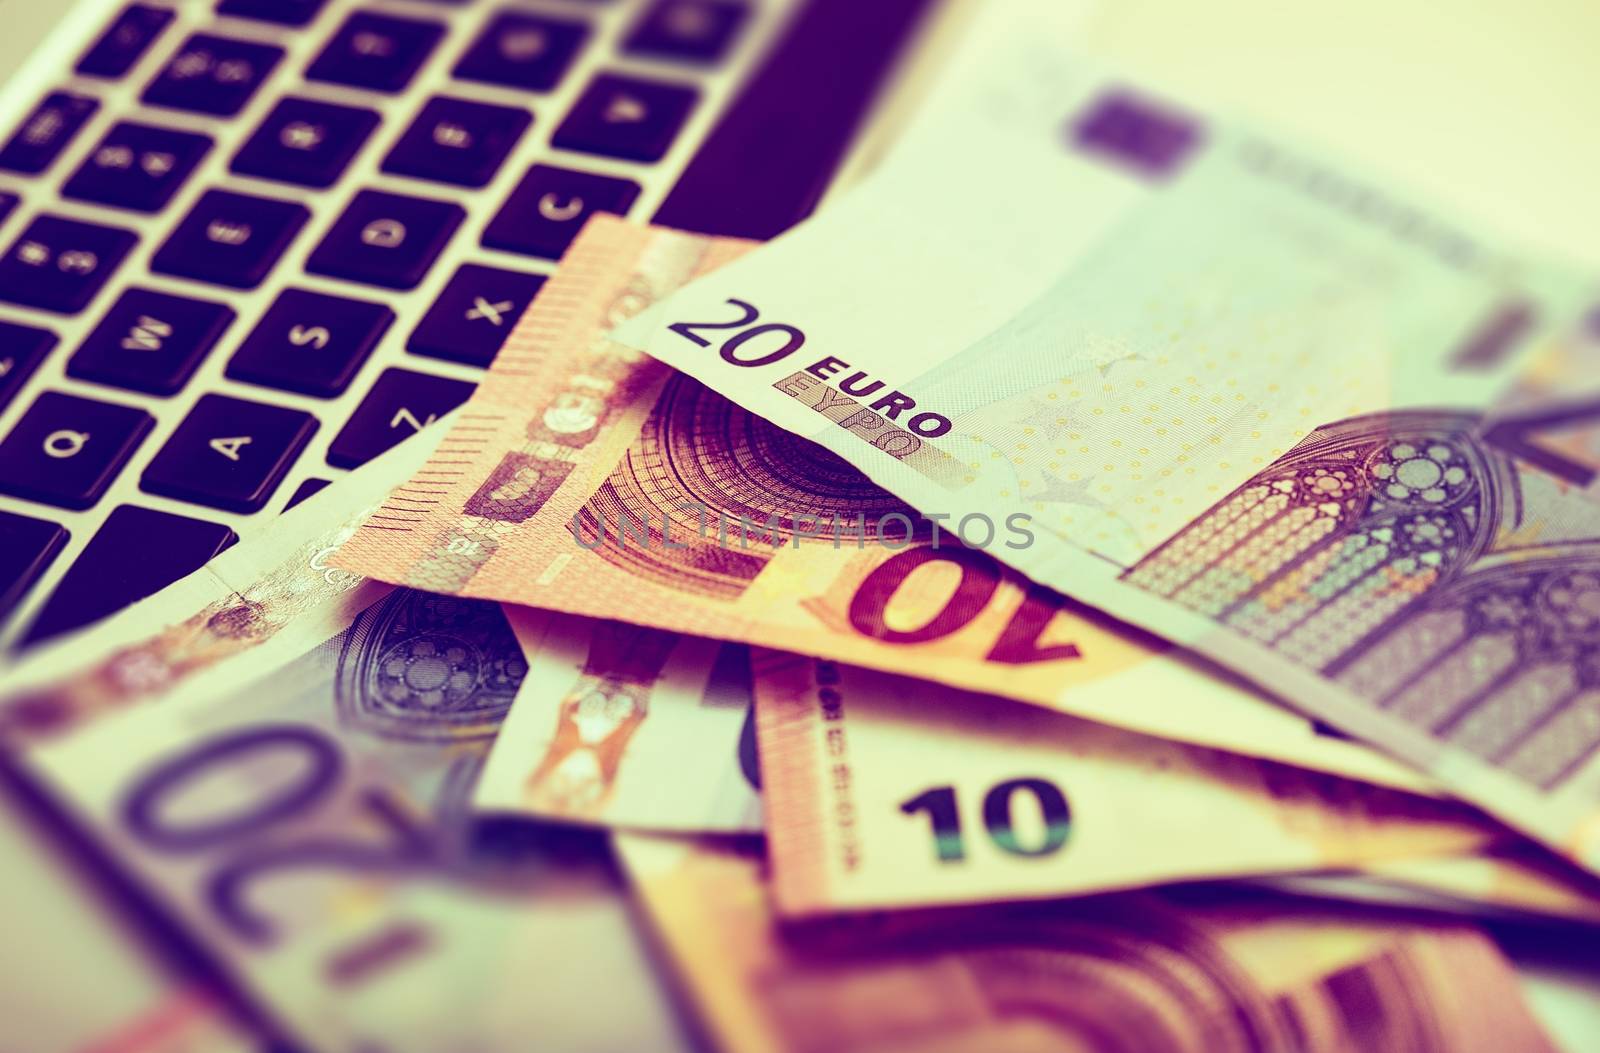 Successful Online Business Concept with Laptop Keyboard and Euro Bills. Making Money on the Internet Business Concept.